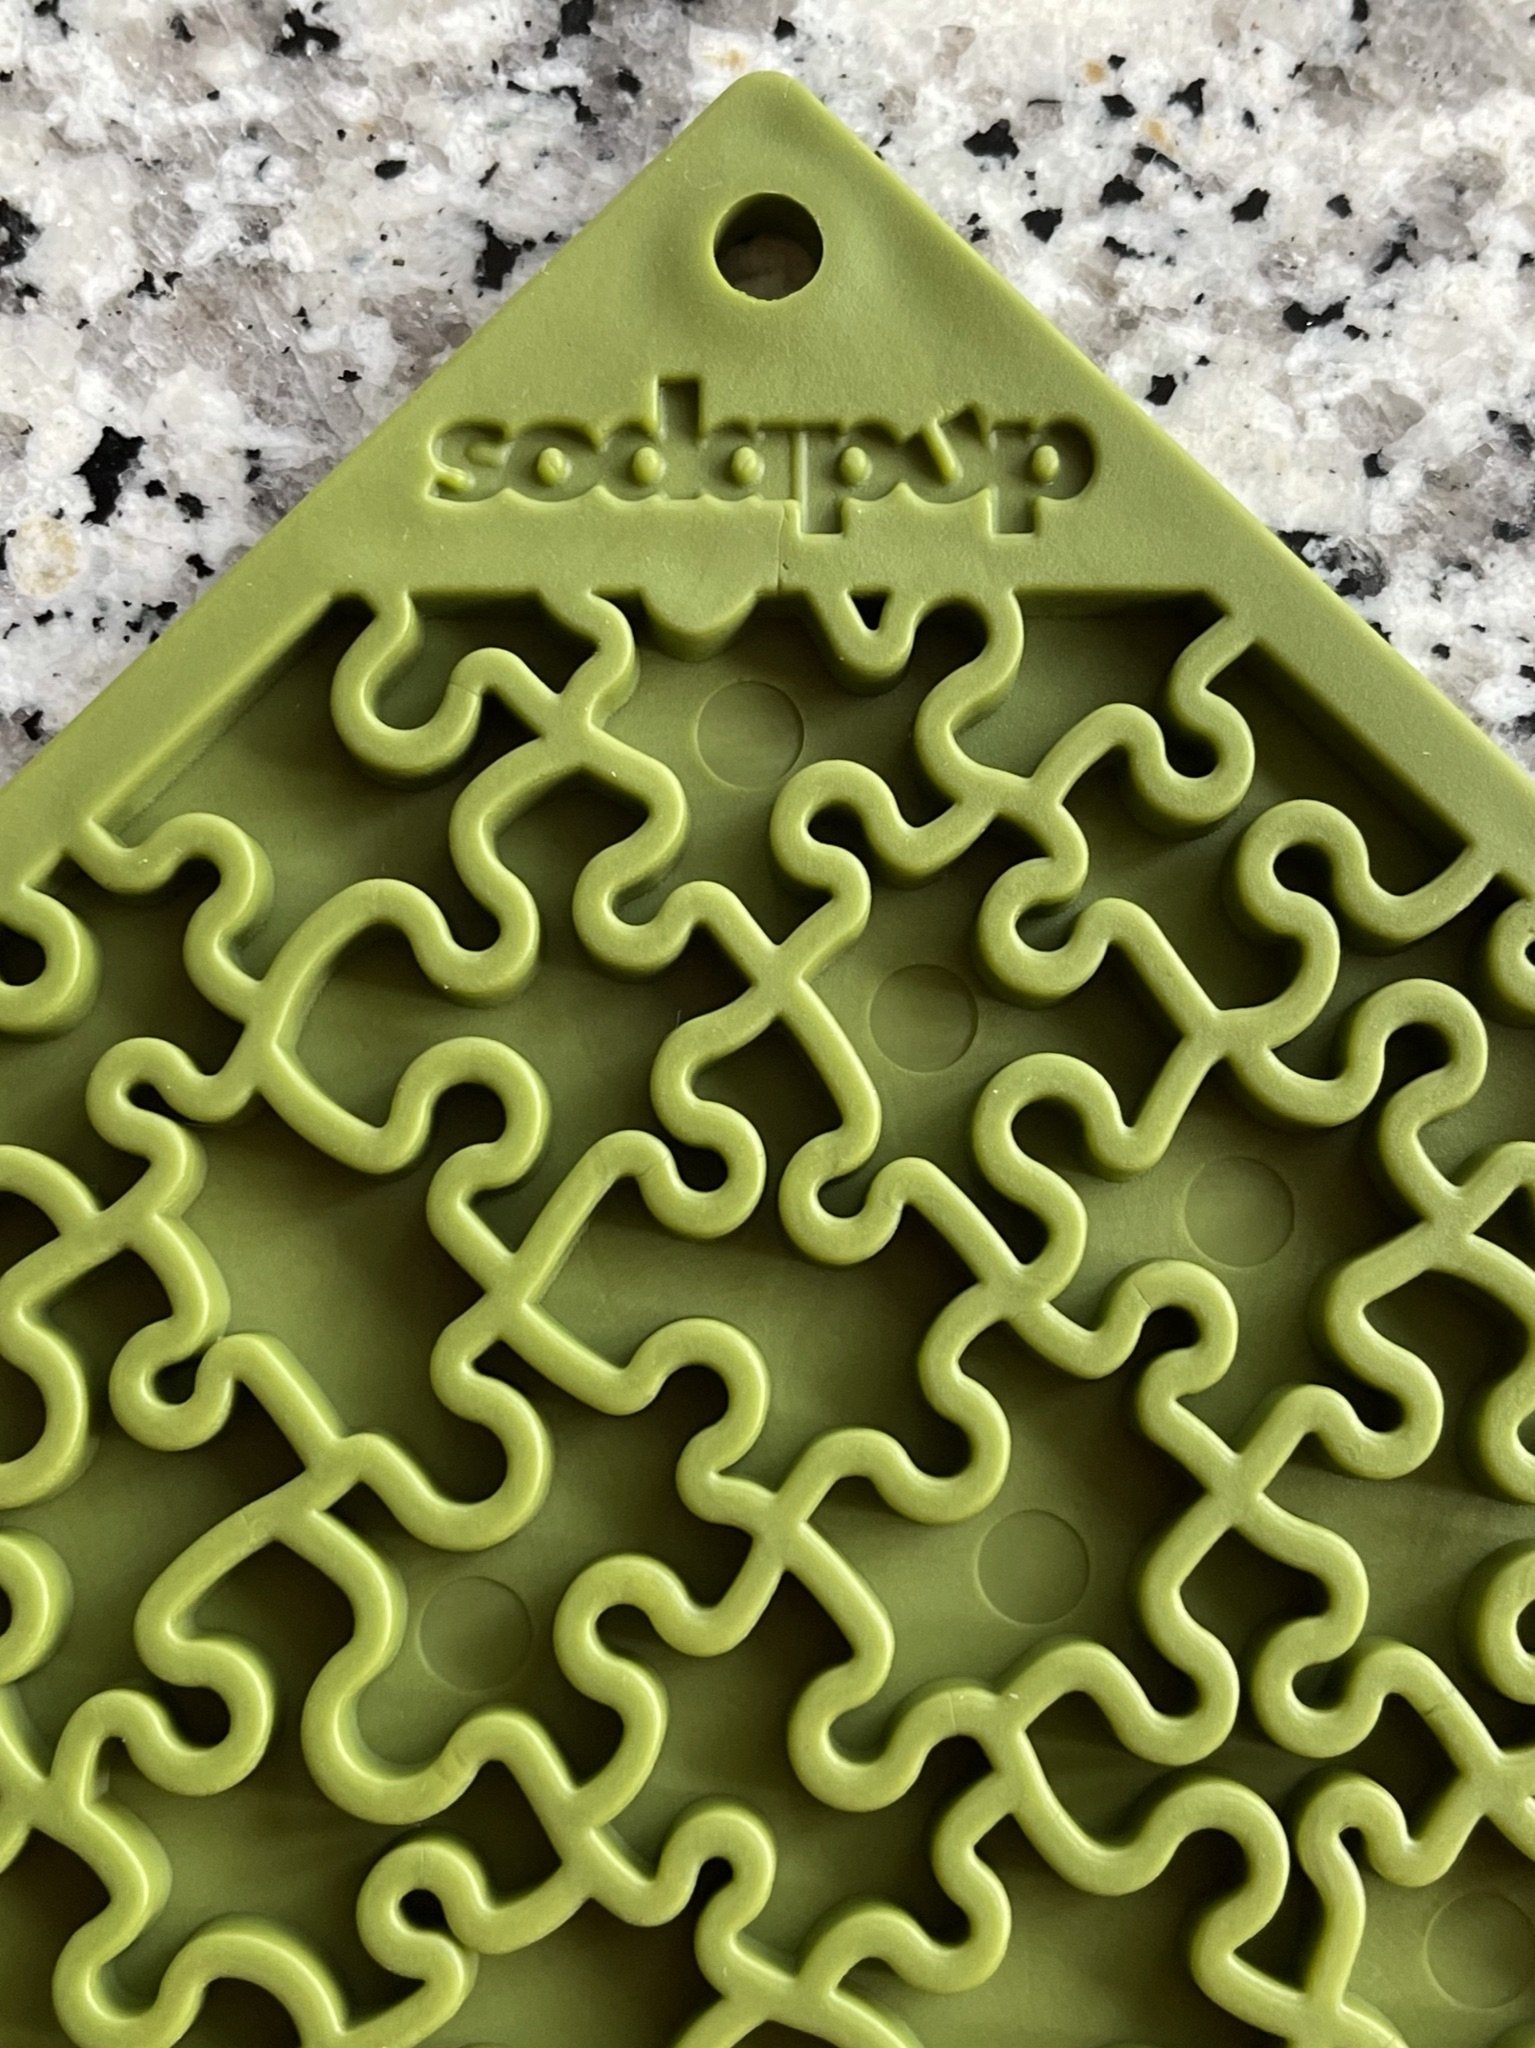 A close-up view of a green 'Your Whole Dog' branded Soda Pup EMAT ENRICHMENT LICKING MAT with an intricate maze-like texture.